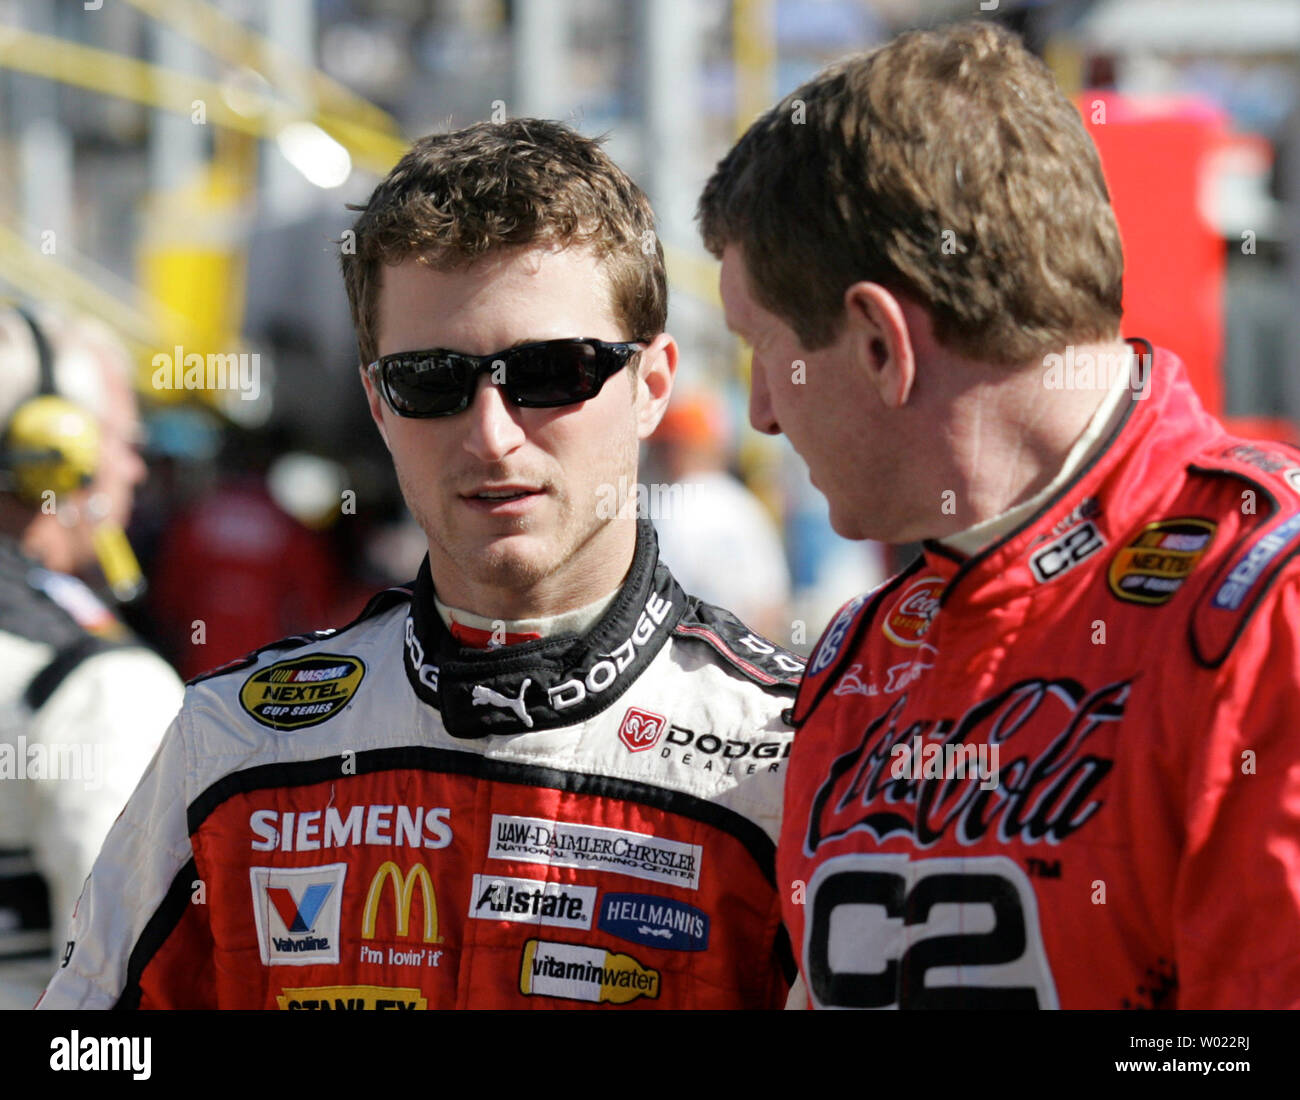 Kasey Kahne, of Enumclaw, WA. chats with Bill Elliott of Dawsonville, GA as they head to their cars to drive in the Checker Auto Parts '500' at the Phoenix International Raceway in Avondale, AZ., November 12,2006.  Kahne who drives for the Dodge Dealers/UAW Dodge team and Elliott who drives for the R&J Racing Dodge team finished seventh and 31st respectively.  (UPI PHoto/Art Foxall) Stock Photo